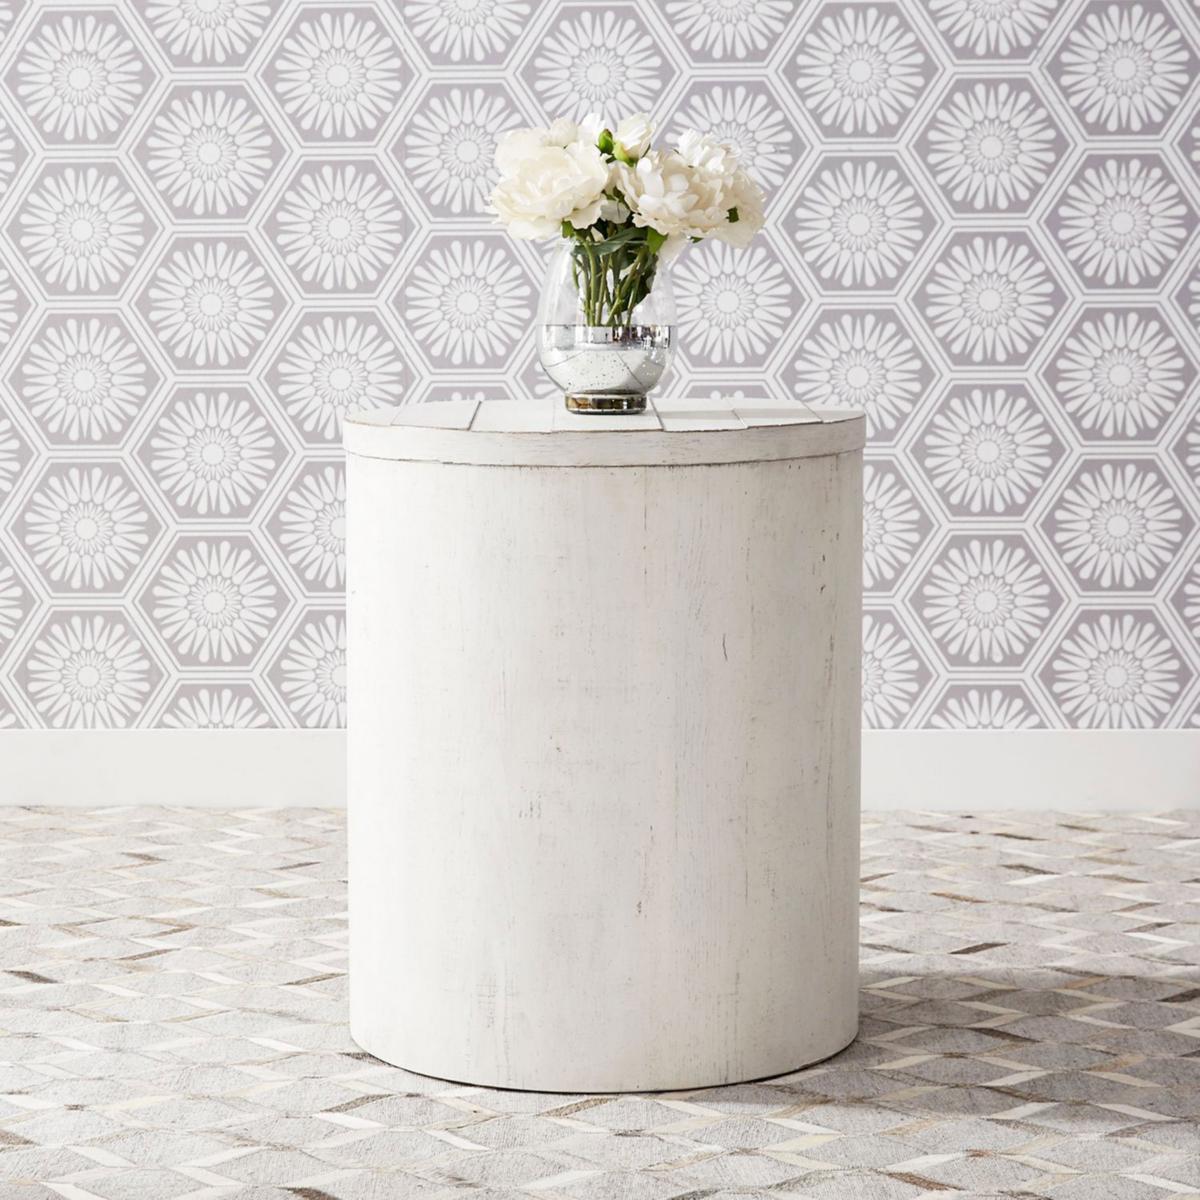 Spring Decor | Flower Wall Paper